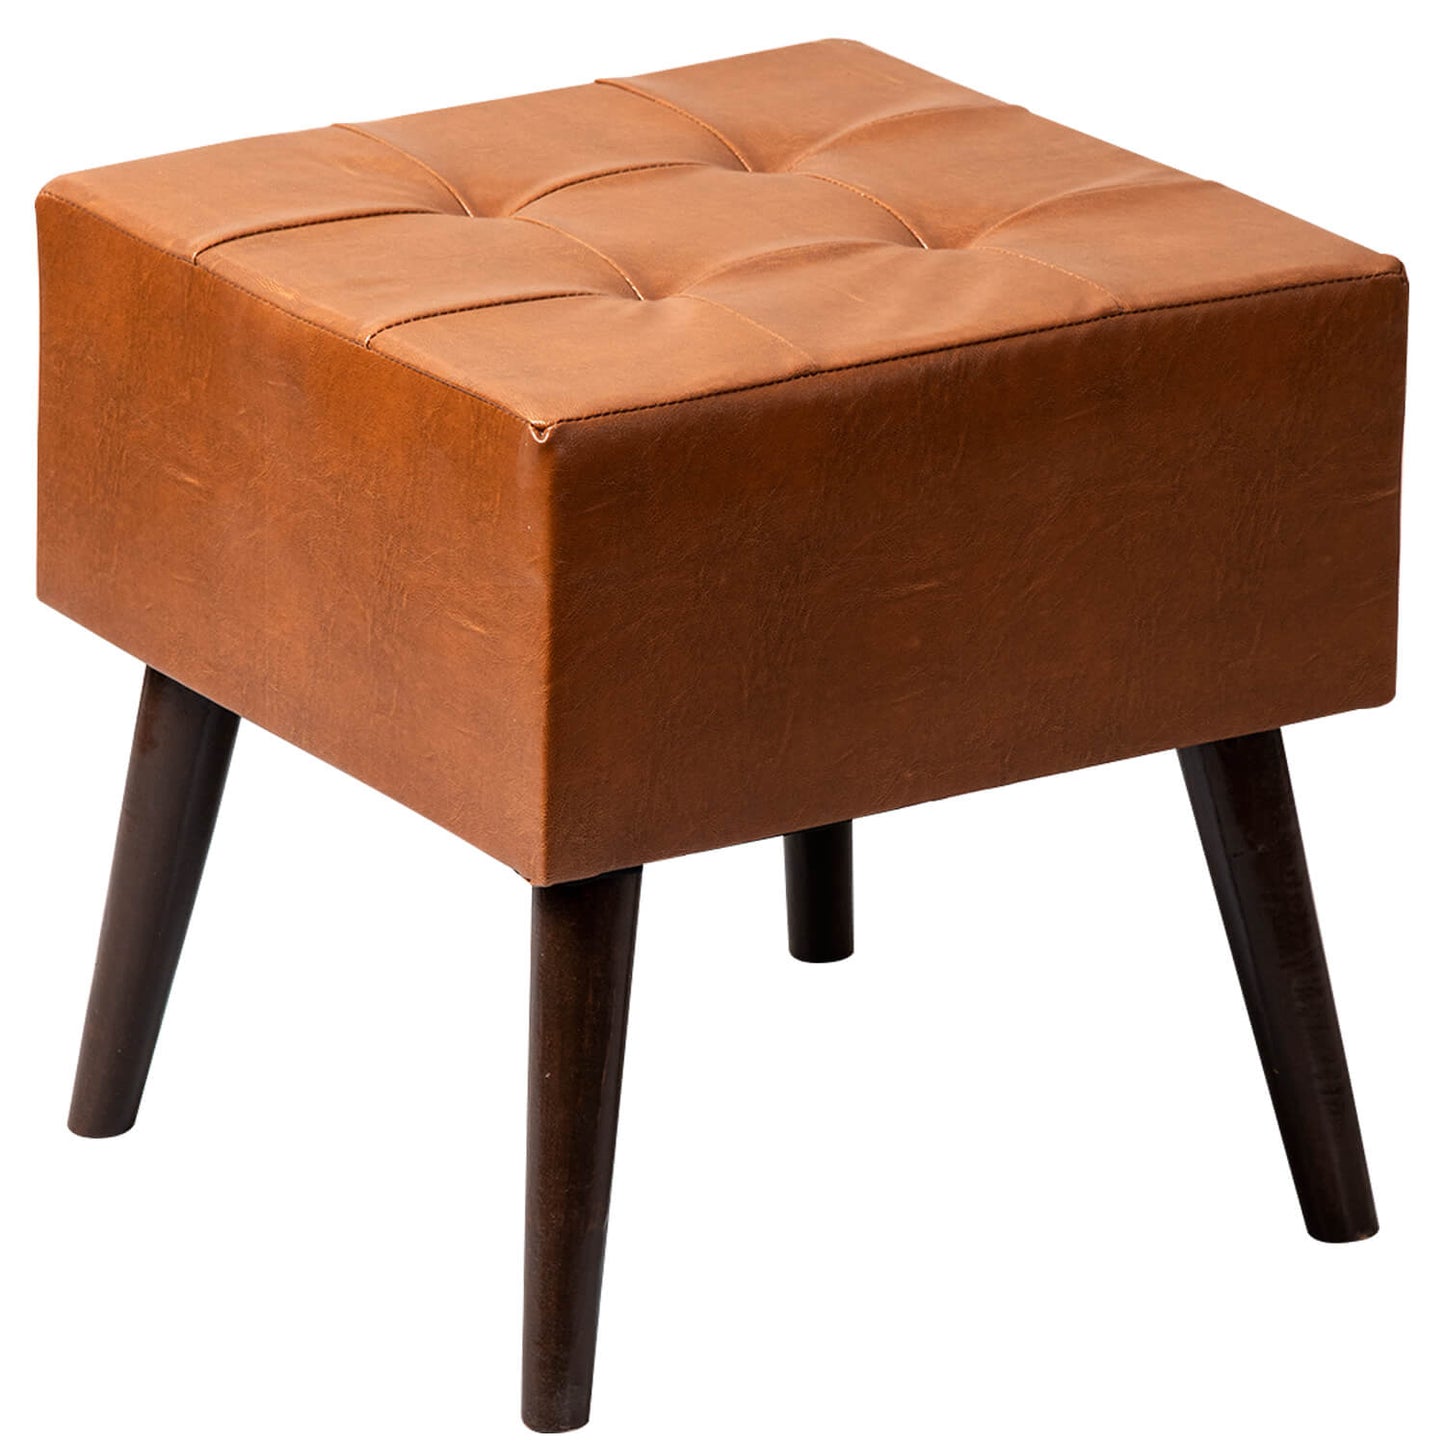 Wooden seating stool